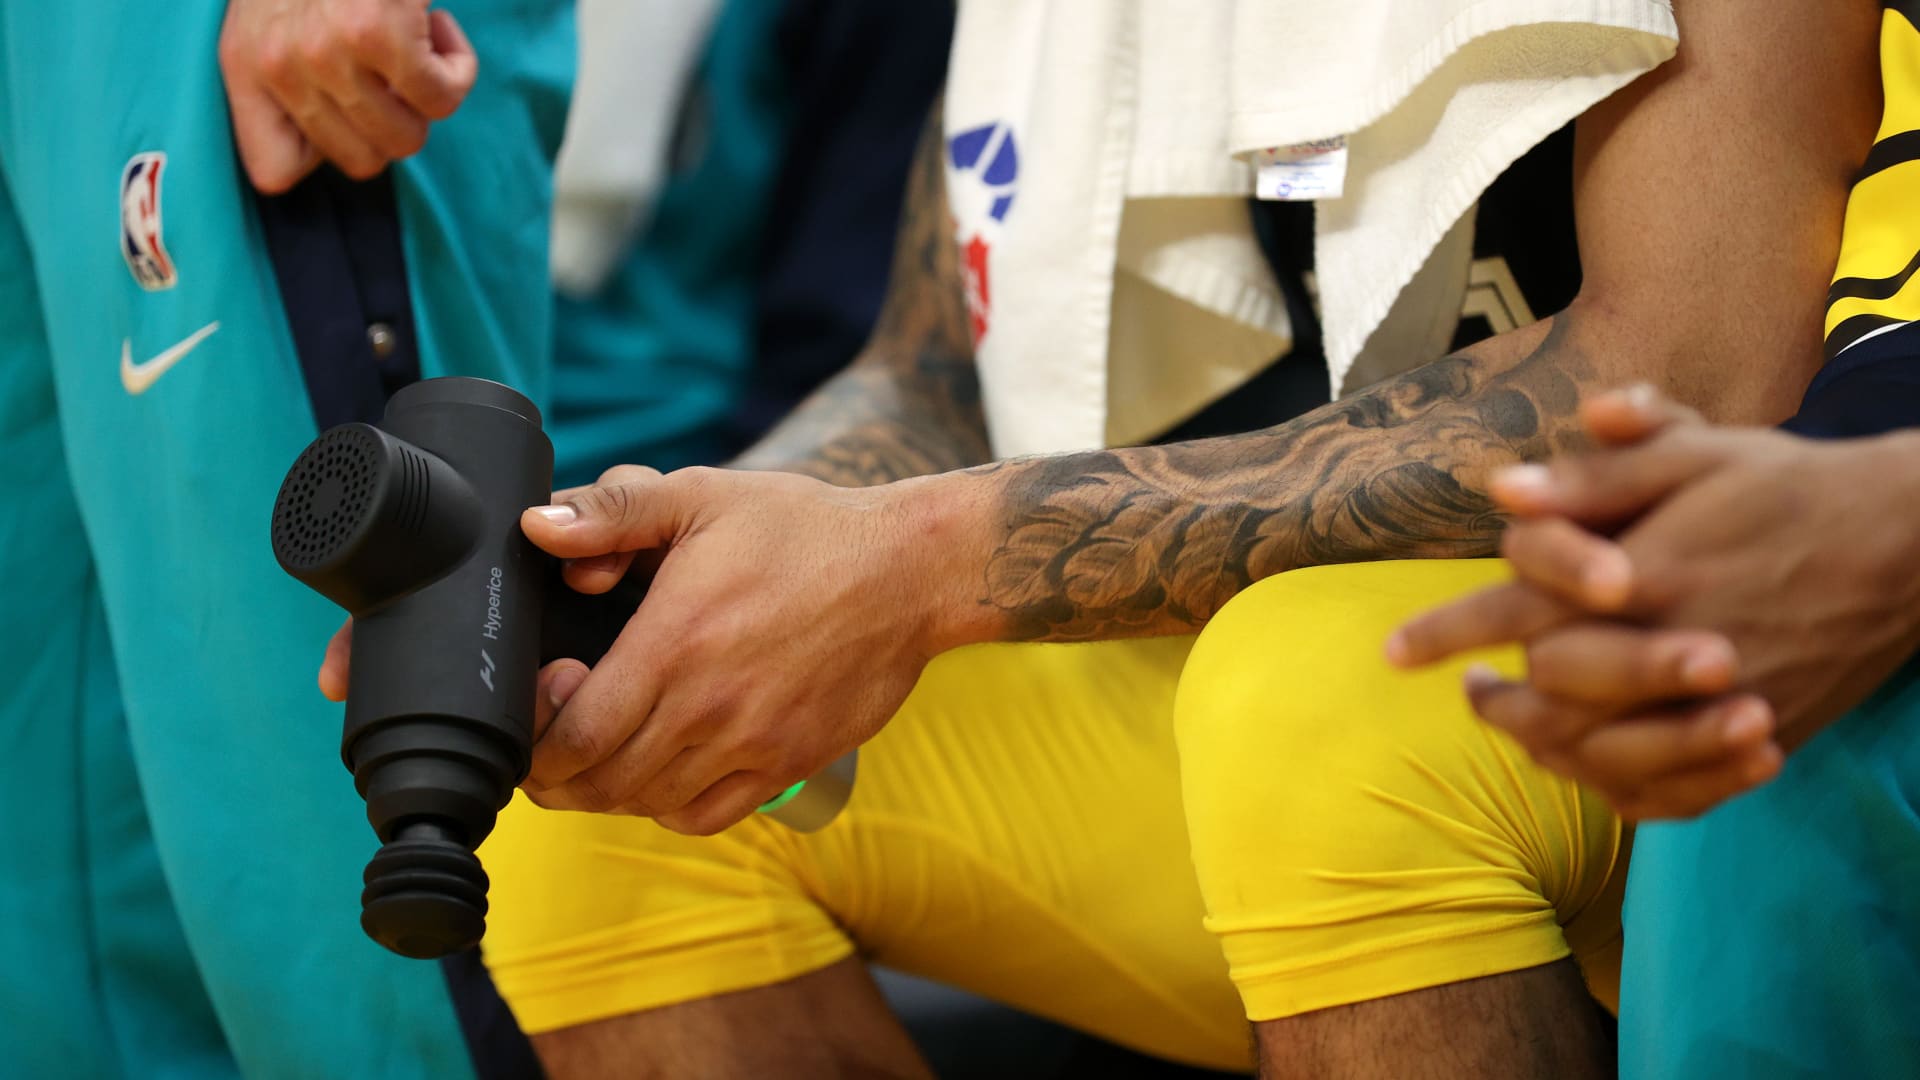 Percussive massagers can regularly be seen being used by athletes on the sidelines of NBA games.